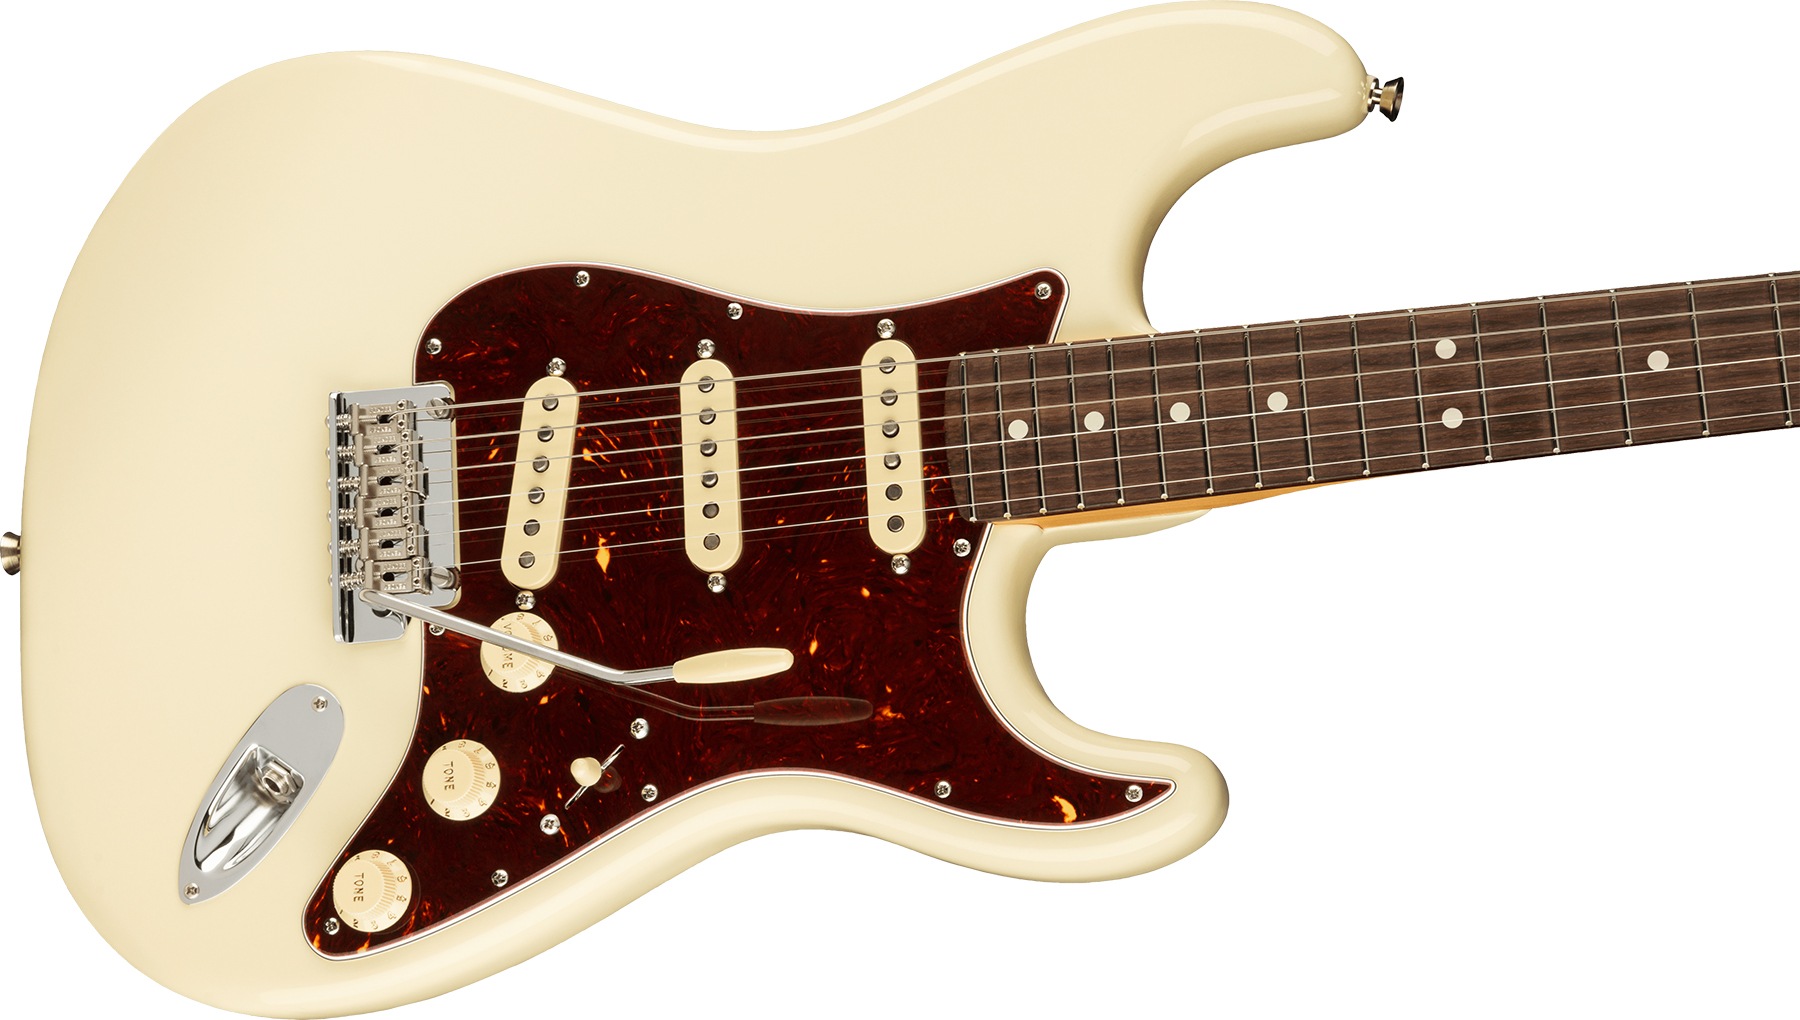 Fender Strat American Professional Ii Usa Rw - Olympic White - Guitare Électrique Forme Str - Variation 2